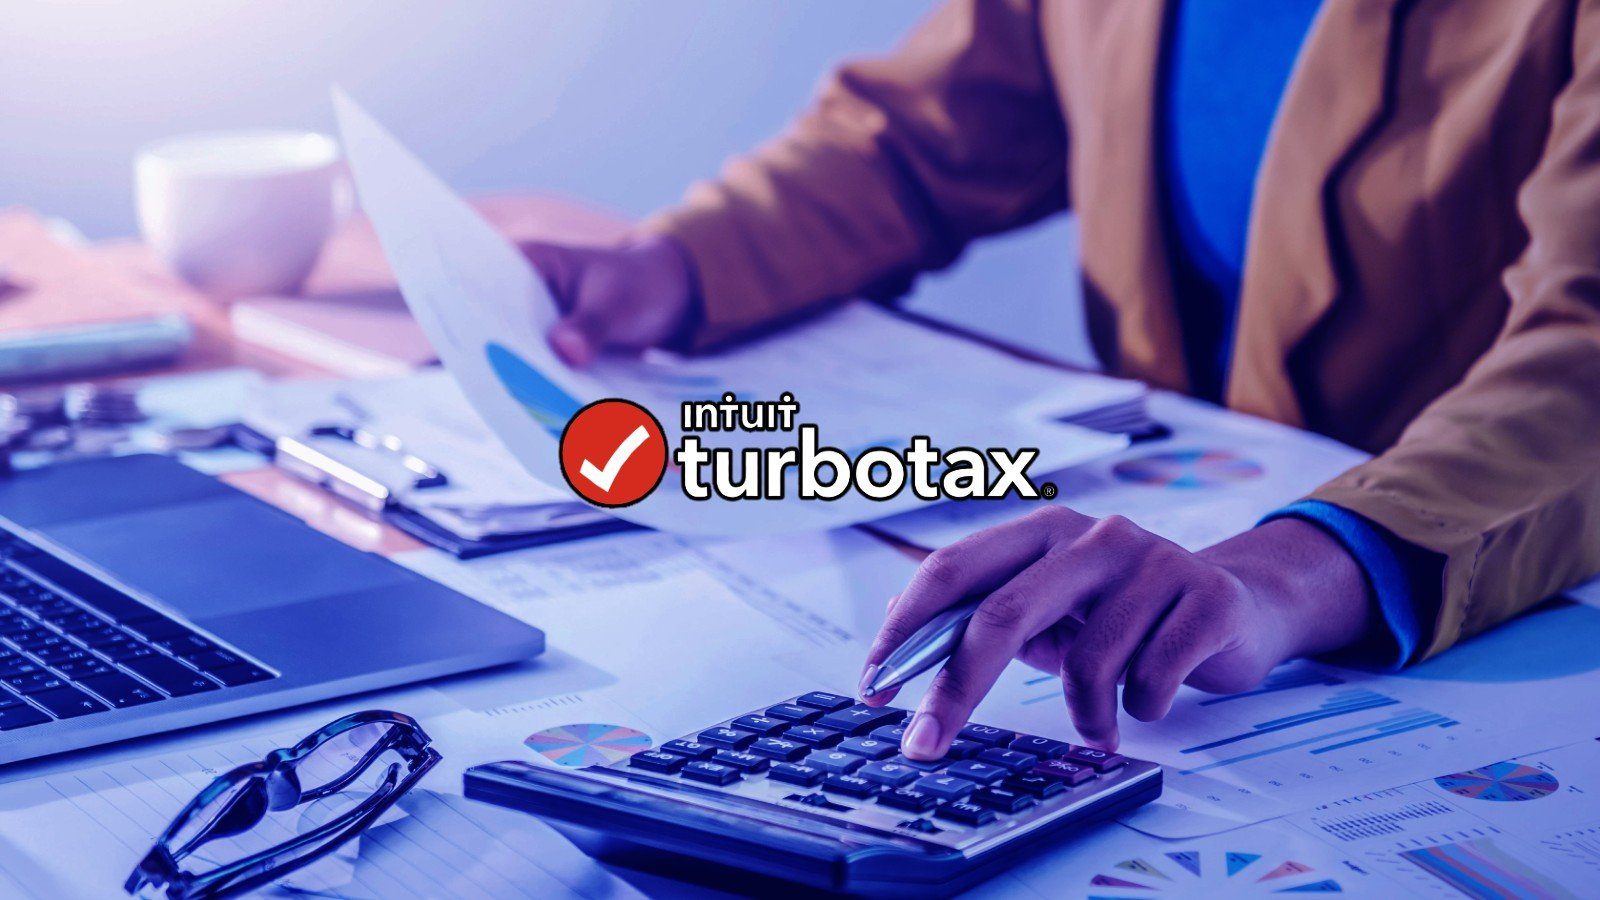 Learn How to Apply for a Tax Refund Advance with Turbotax